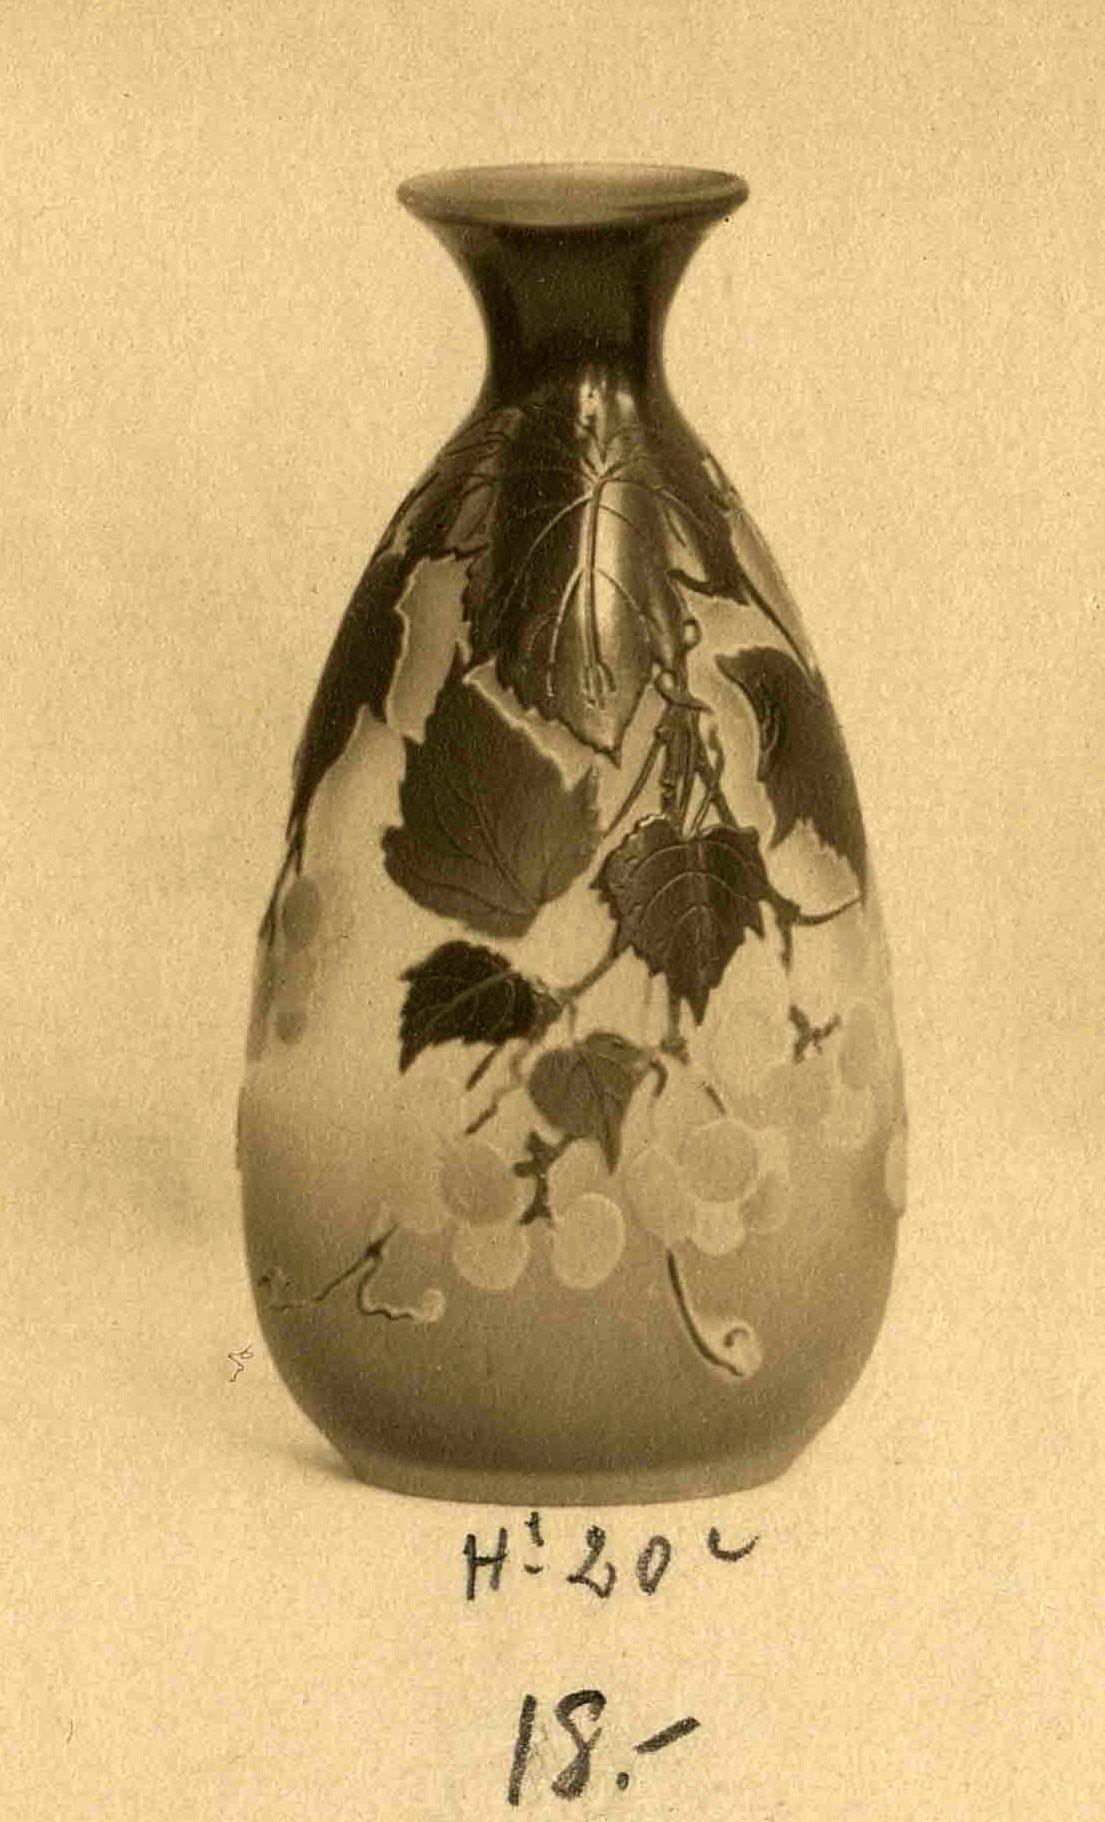 Bottle or carafe shape in the Gallé 1927 sales album from the Rakow Library (© Corning Museum of Glass, plate 35, detail).